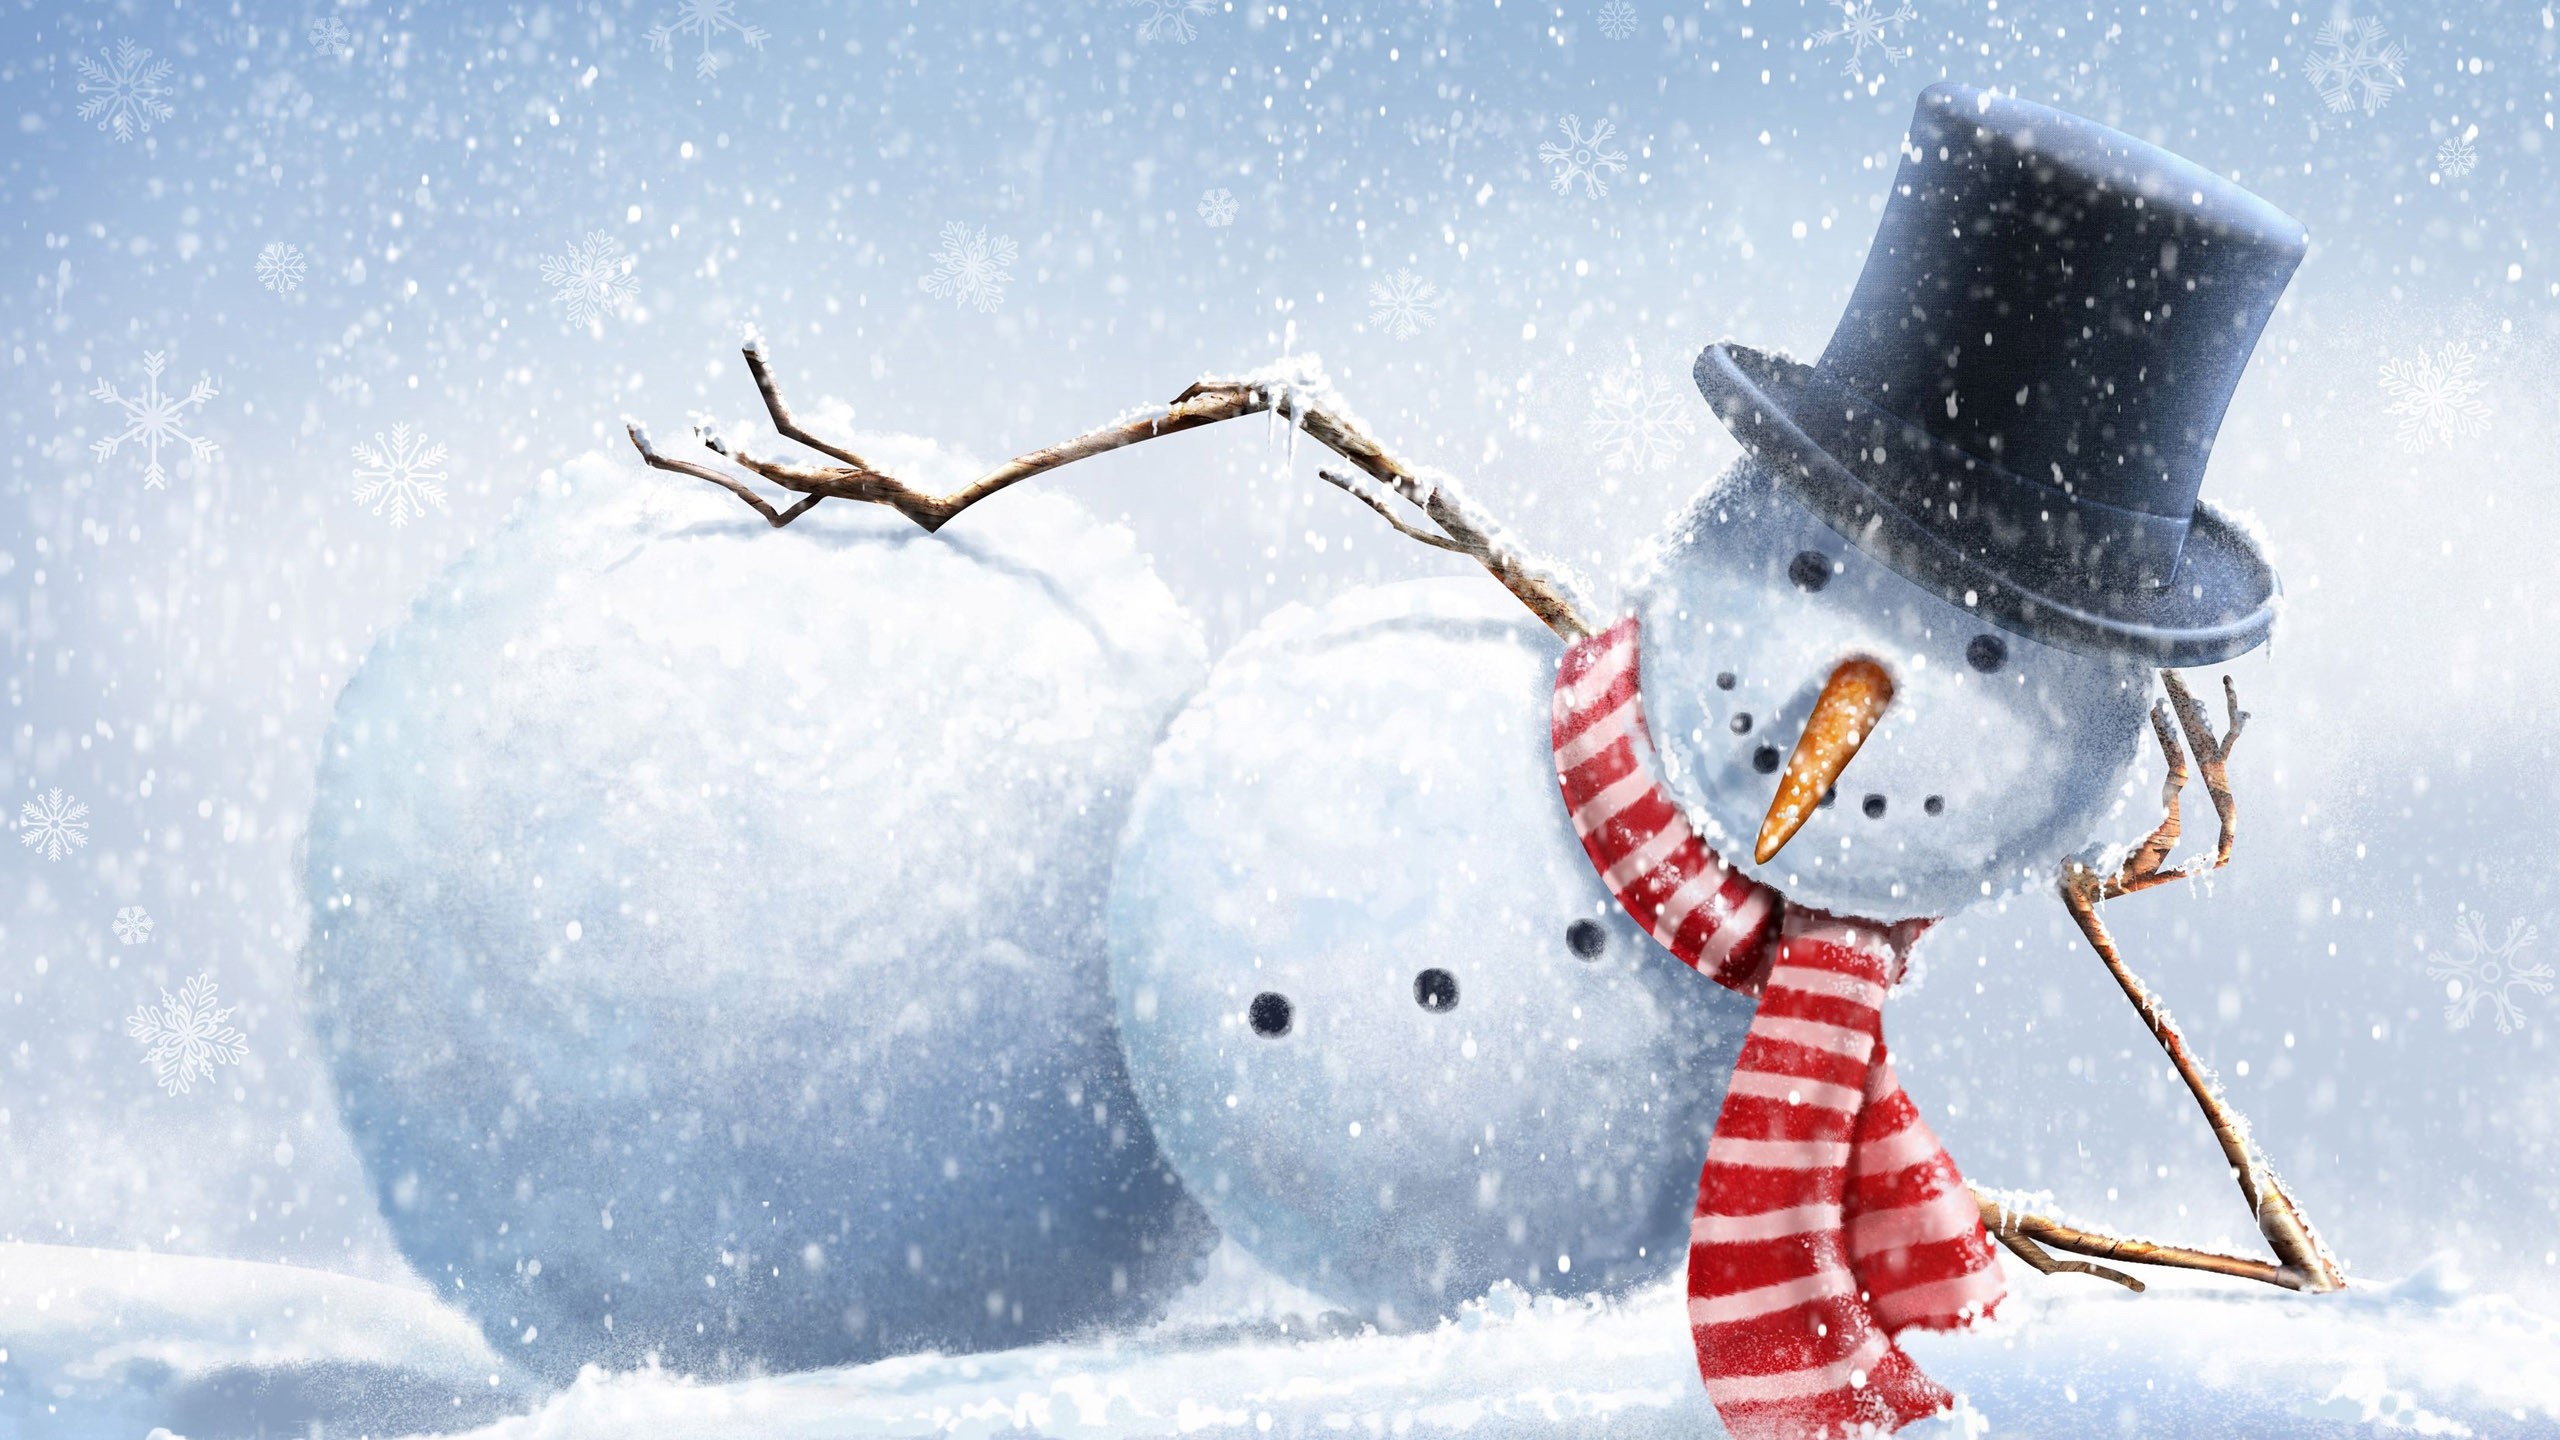 Drawing Snow Winter Snowman Top Hats Branch Carrots Snowflakes Scarf 2560x1440